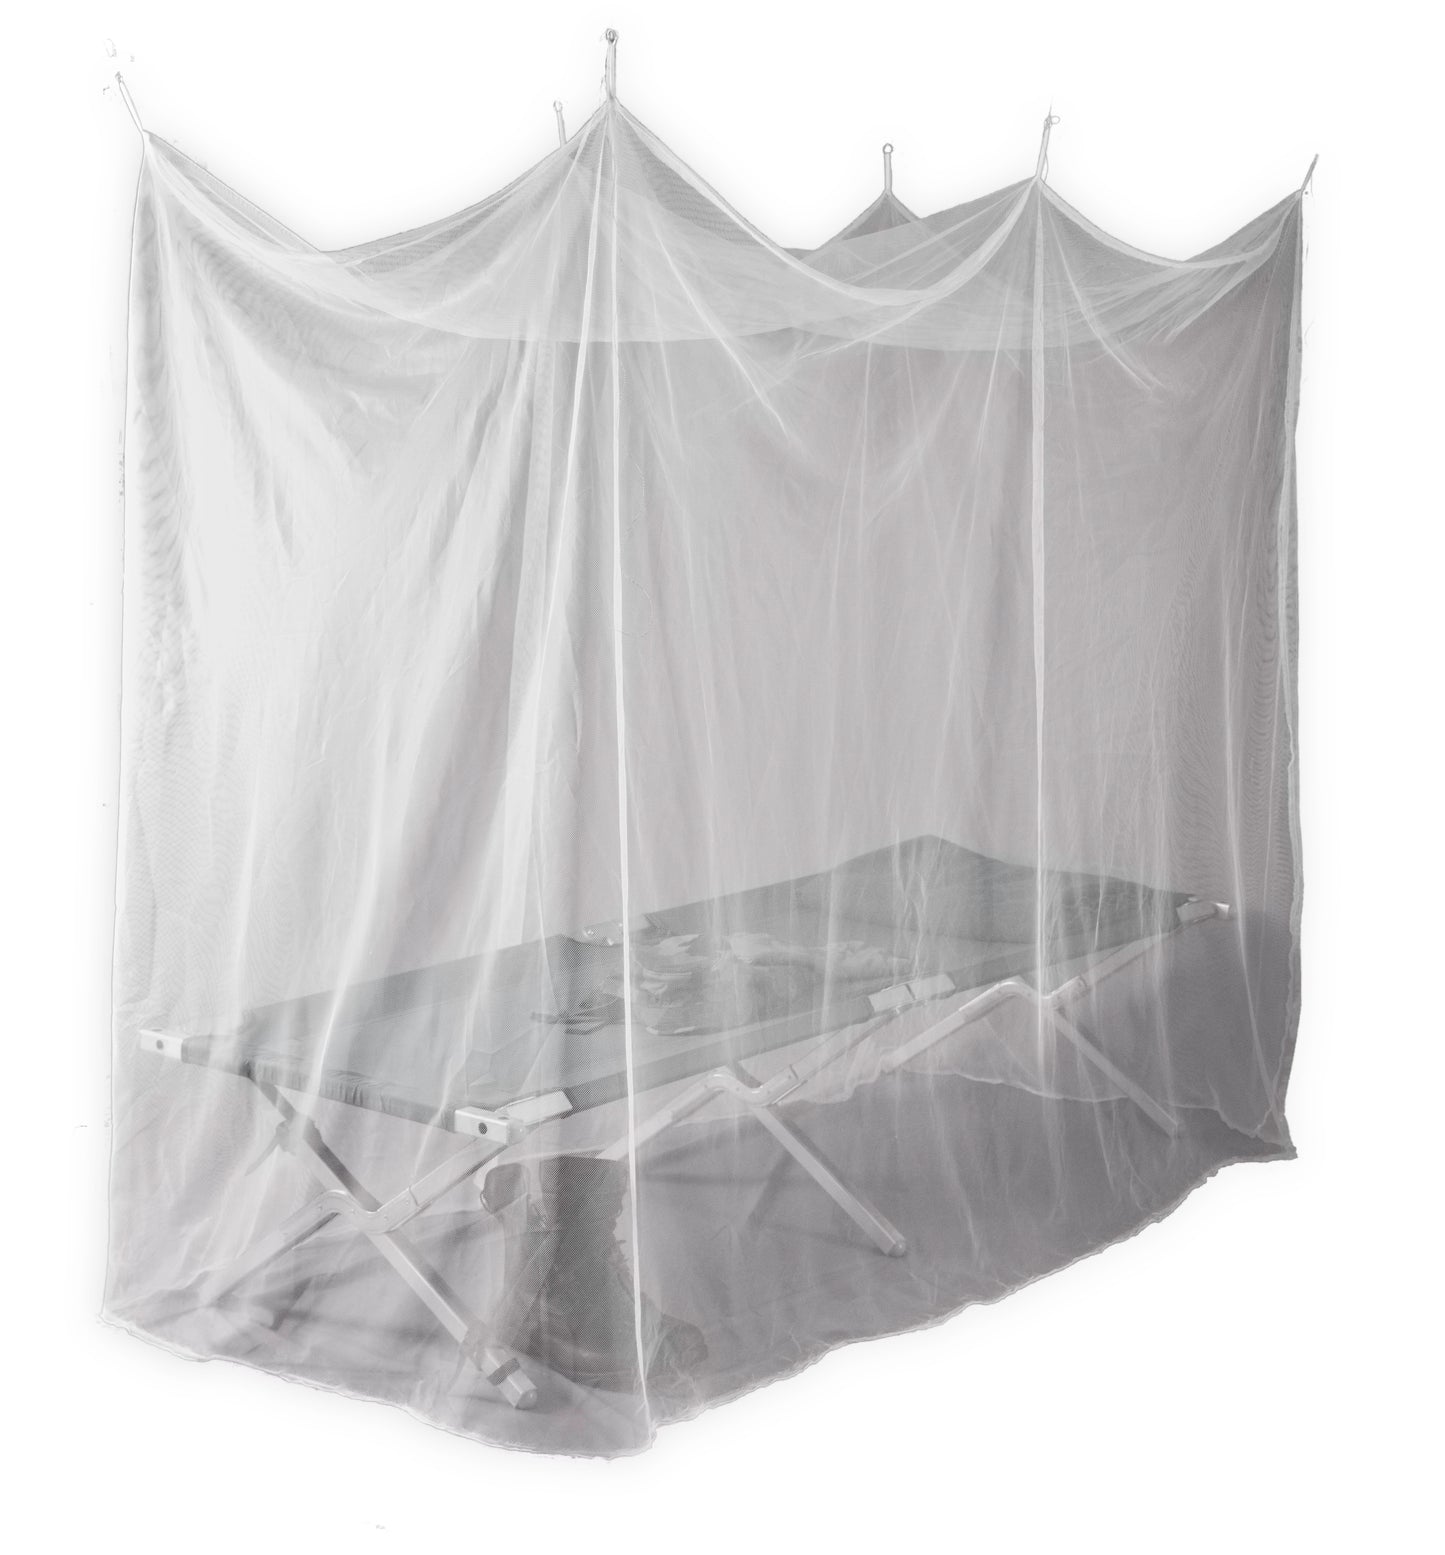 Gadabout Single/Twin Insect Shield Treated Rectangular Mosquito Net w/ Carry bag